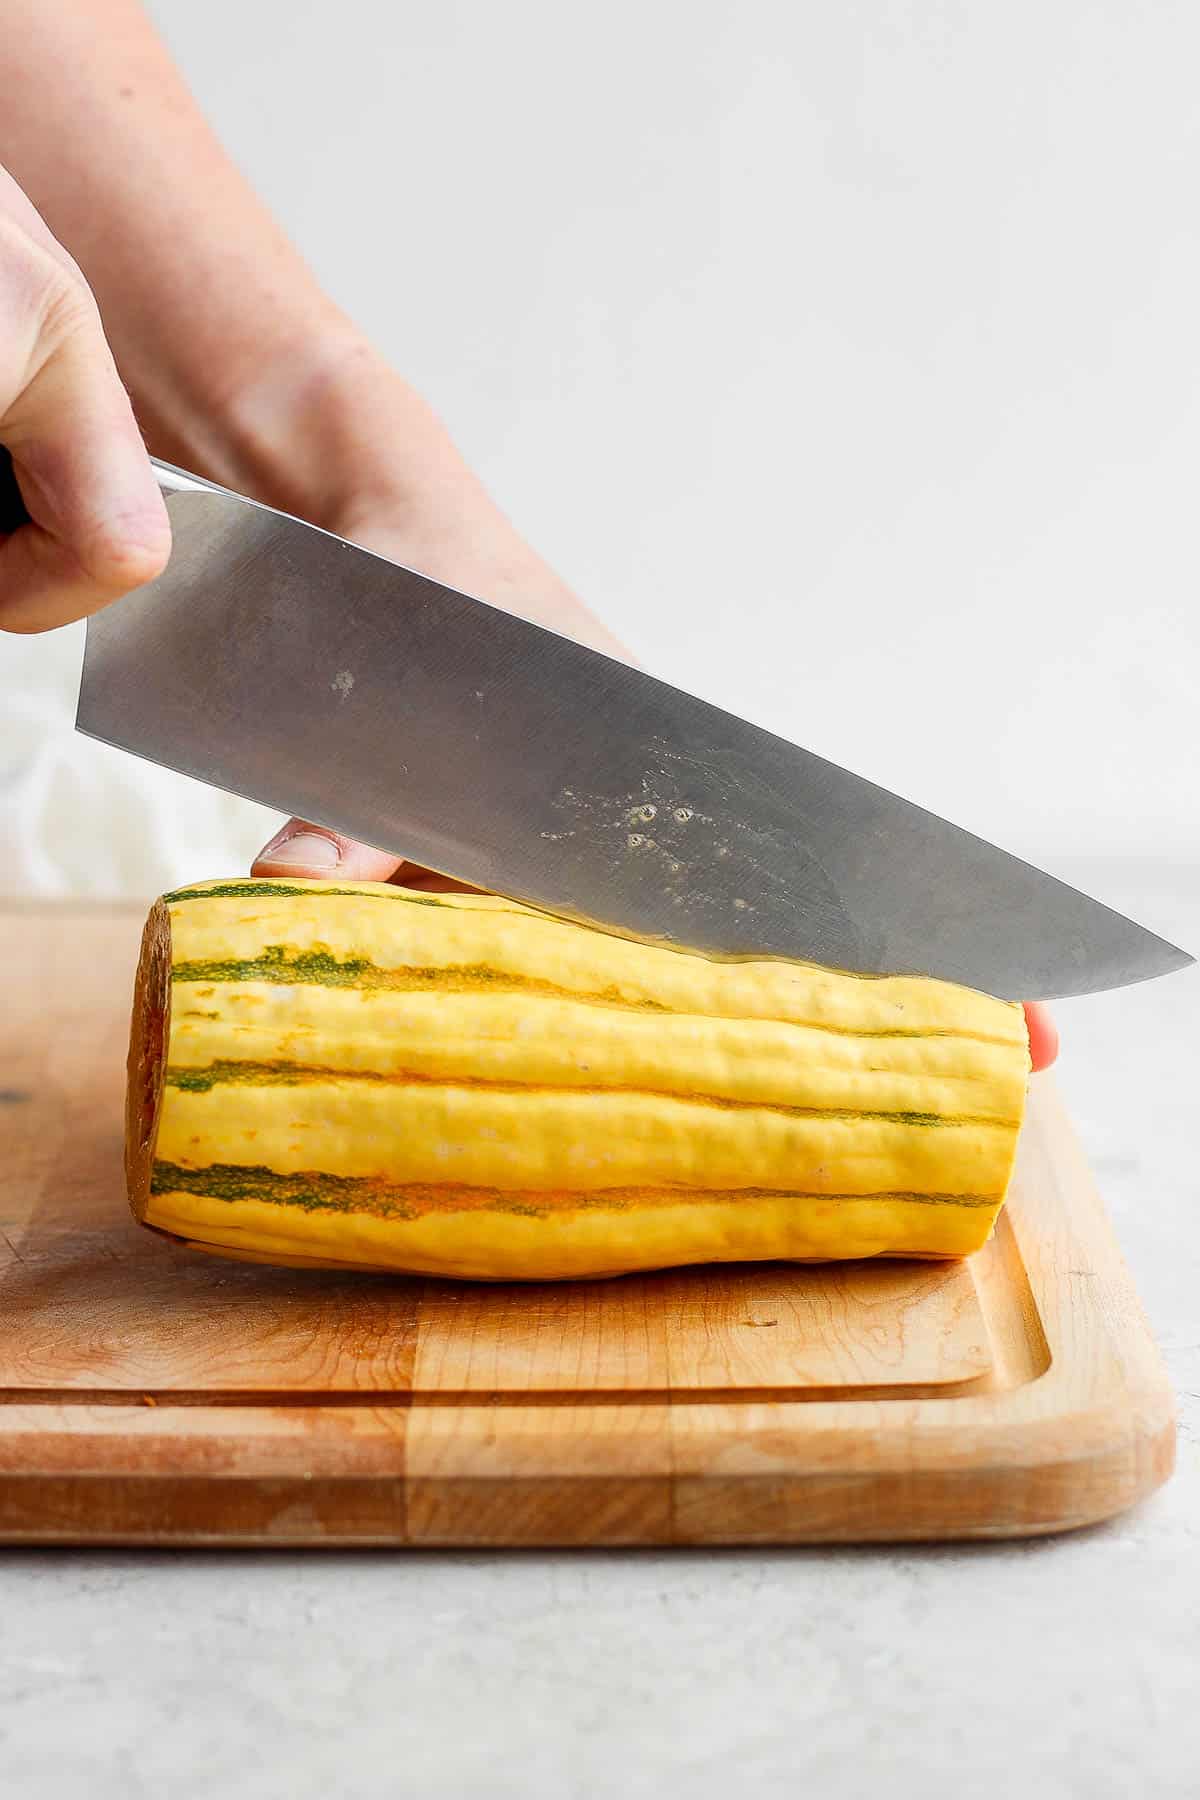 A knife cutting the delicata squash in half, length-wise.